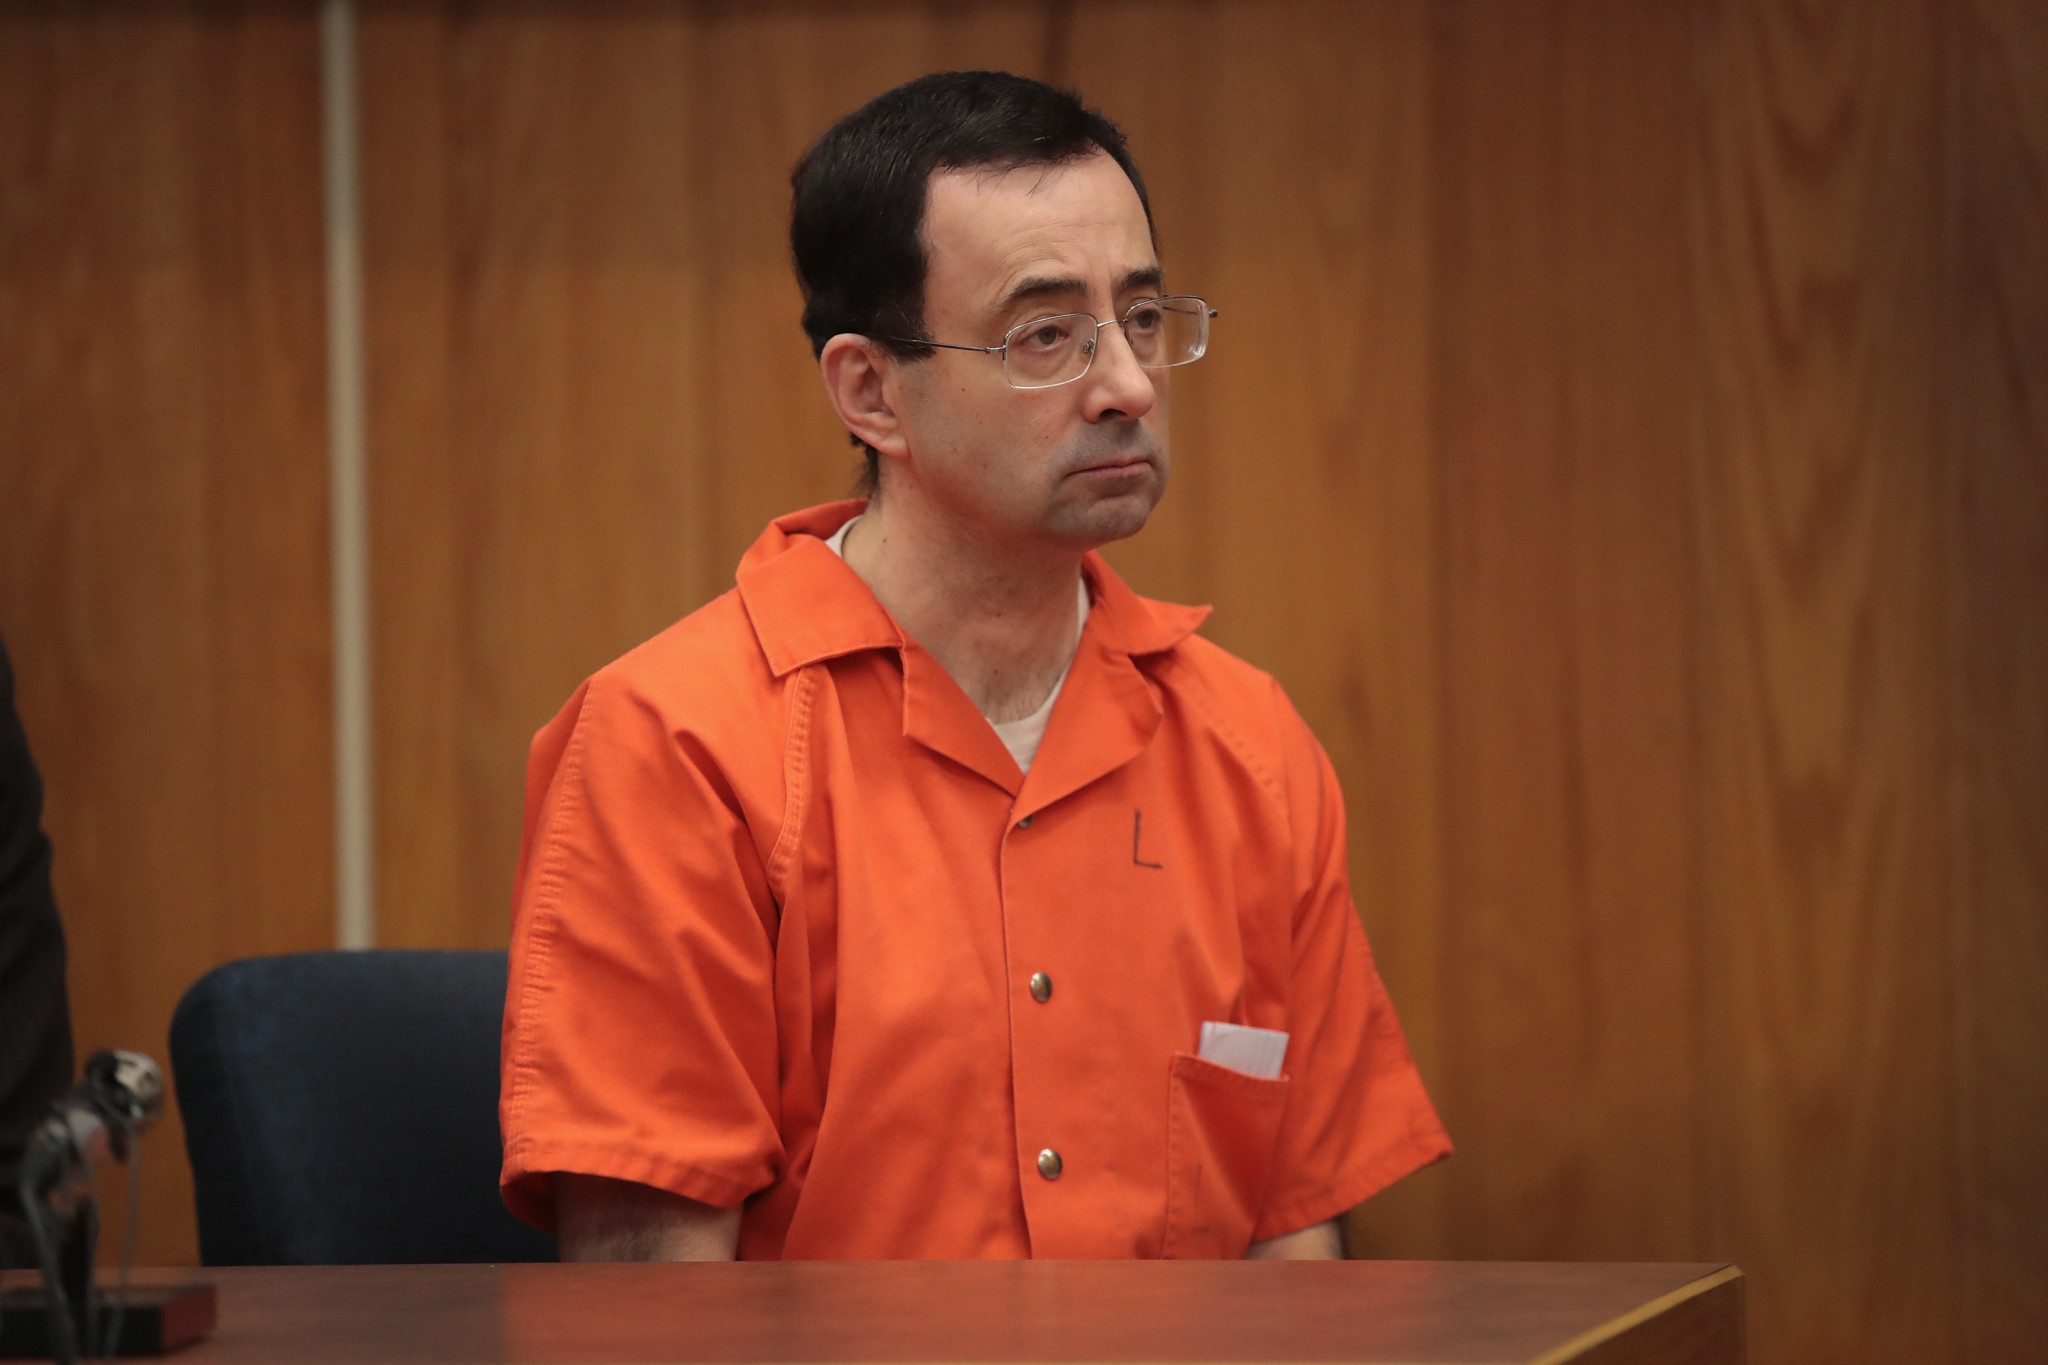 USA Gymnastics doctor Larry Nassar is serving up to 175 years in prison for sexually abusing United States gymnasts, including Simone Biles ©Getty Images